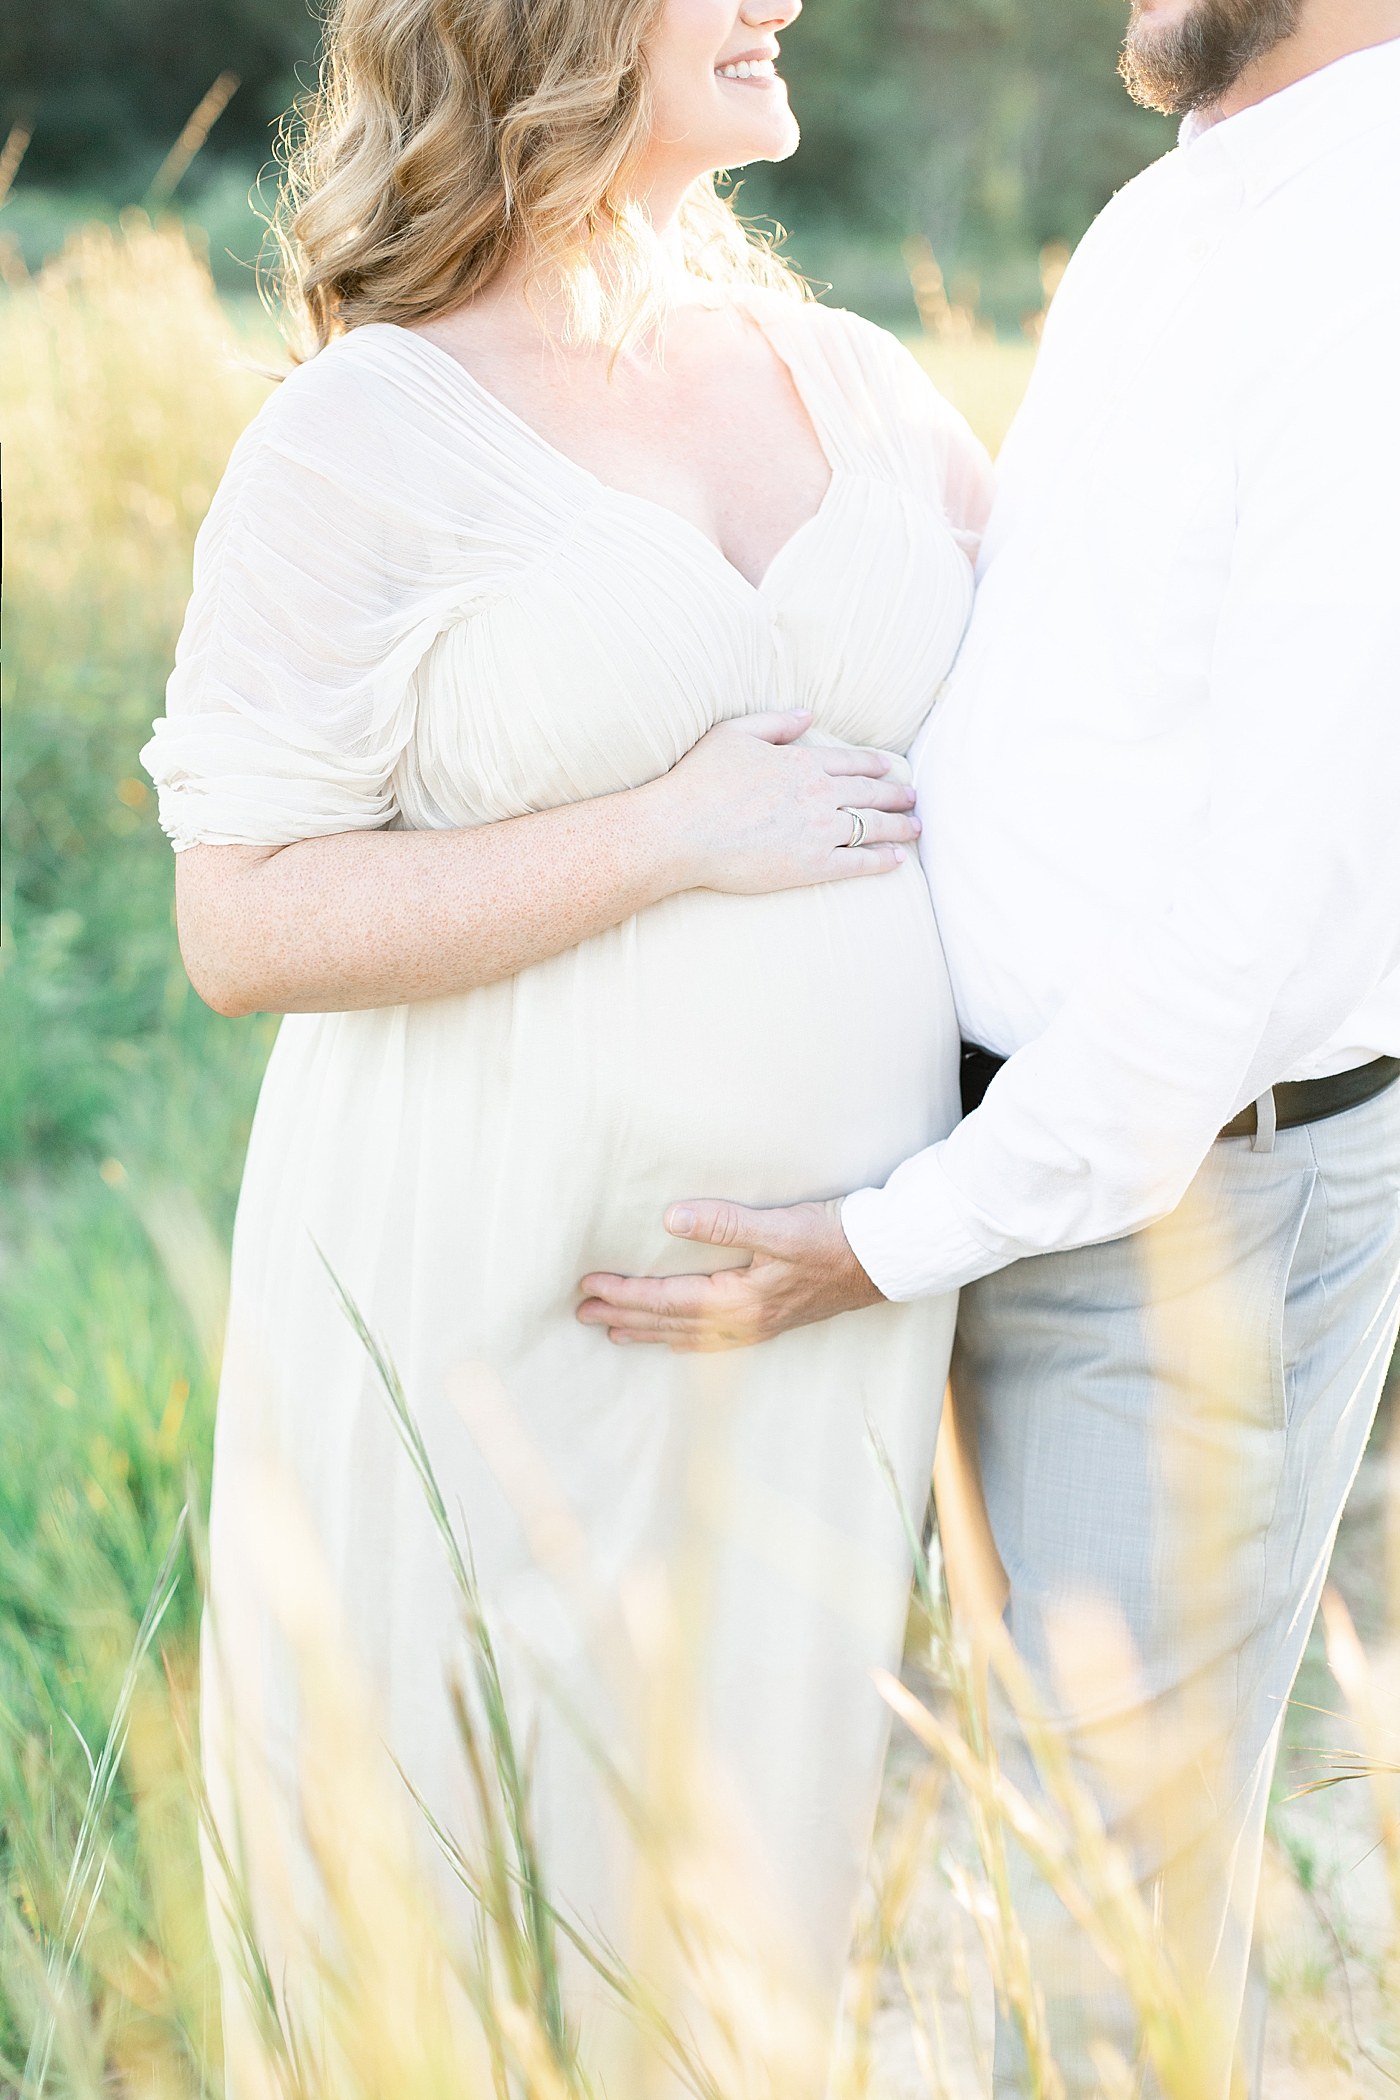 Detail image of moms hand on her belly | Photo by Ocean Springs MS Maternity Photographer Little Sunshine Photography 